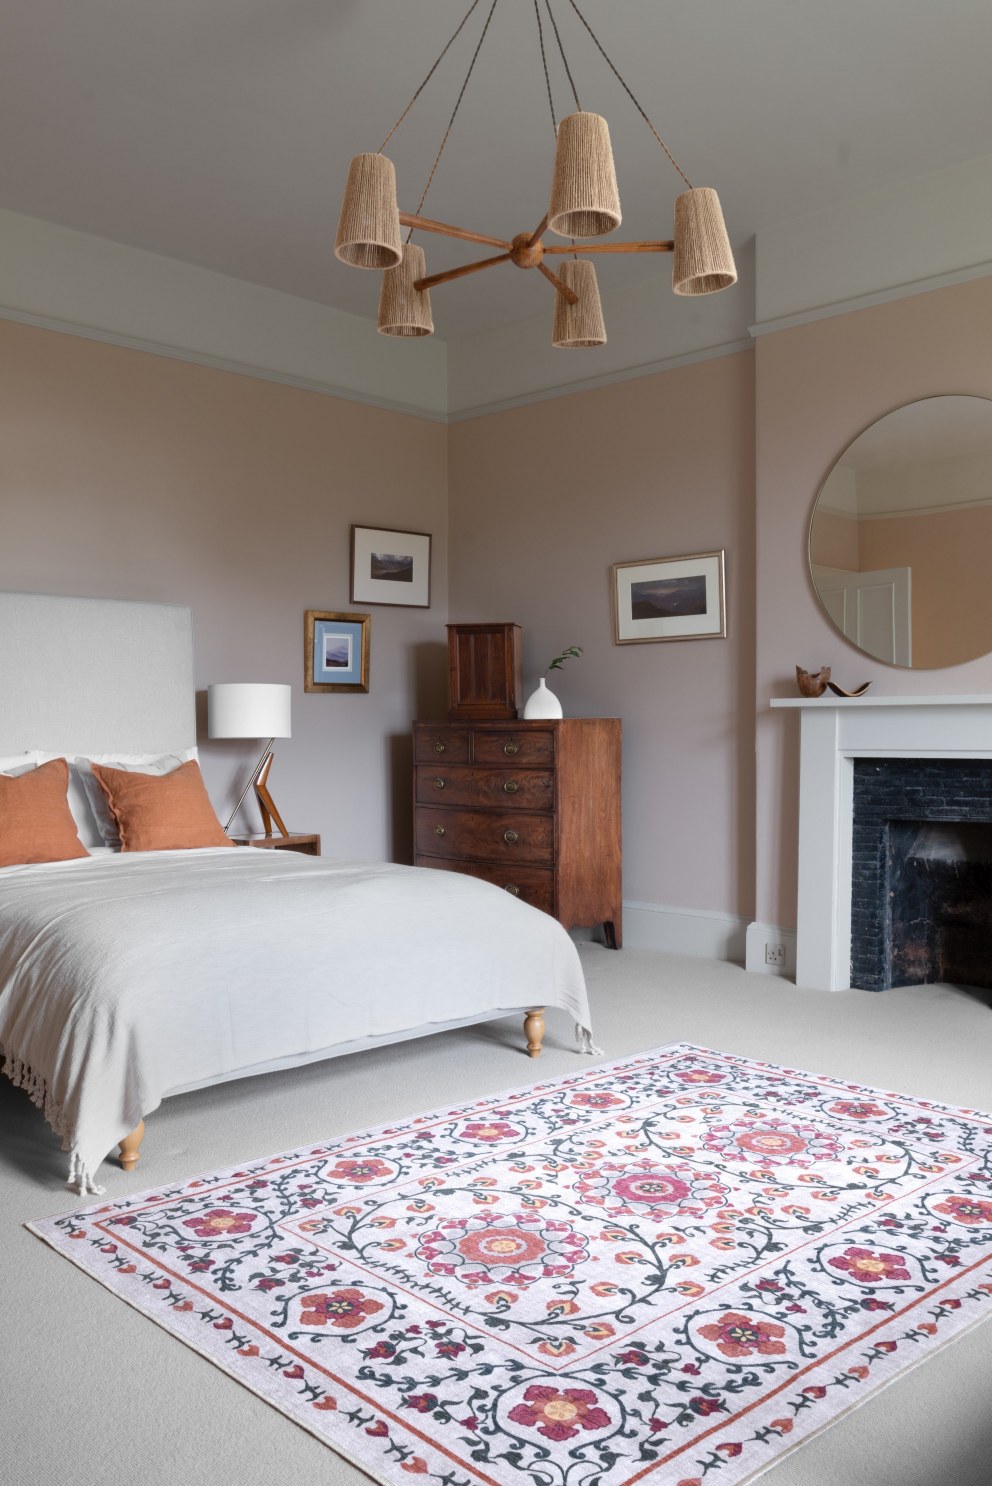 Boutique Holiday Let in a Grade II listed Hall | Bedroom in grade 2 listed hall | Interior Designers